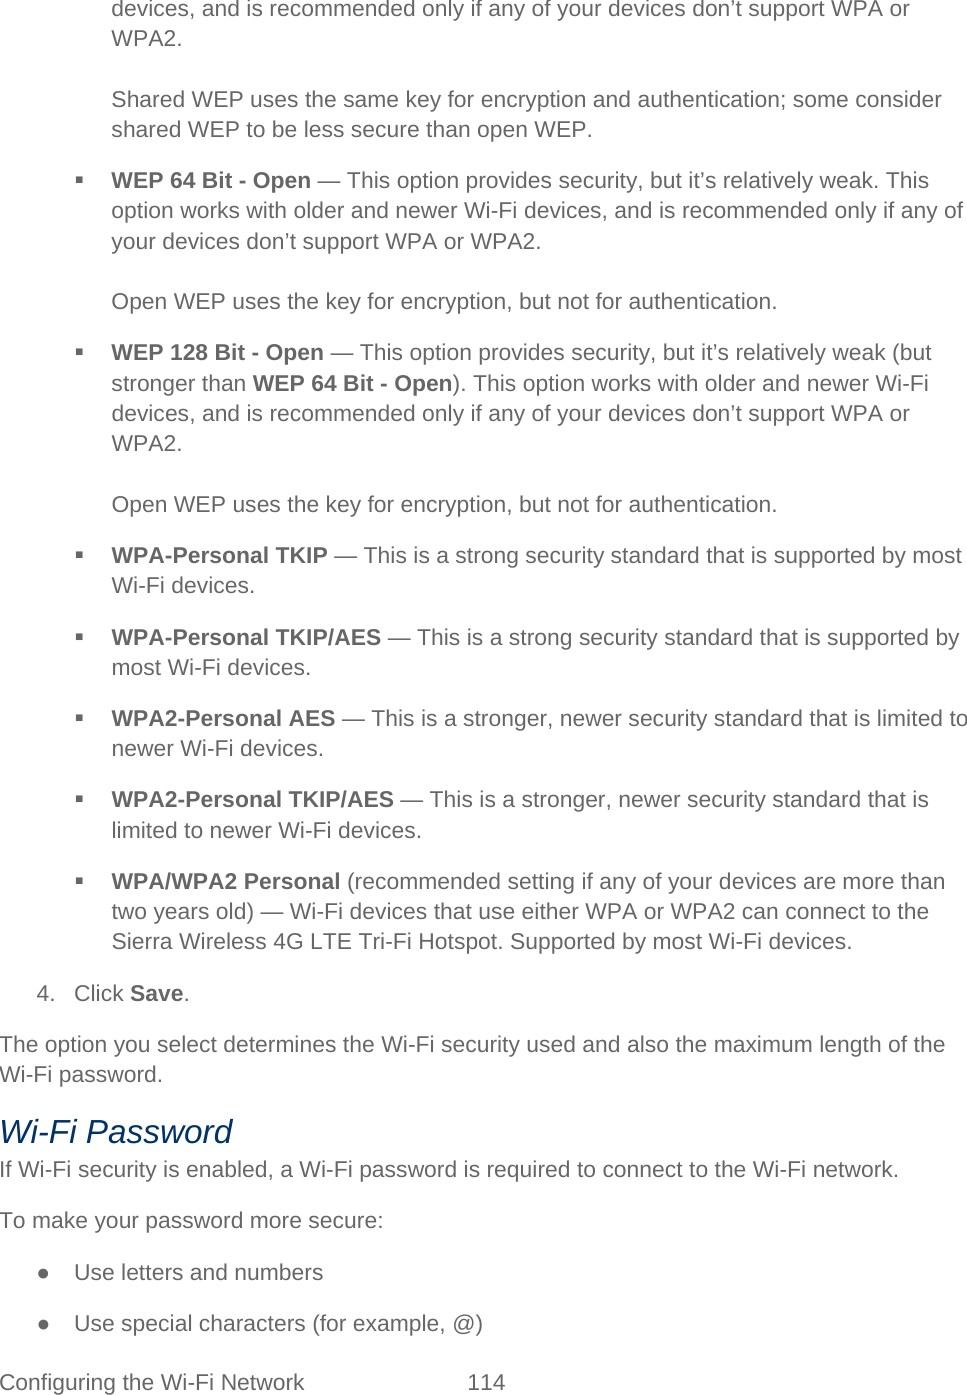 Configuring the Wi-Fi Network 114   devices, and is recommended only if any of your devices don’t support WPA or WPA2.  Shared WEP uses the same key for encryption and authentication; some consider shared WEP to be less secure than open WEP.  WEP 64 Bit - Open — This option provides security, but it’s relatively weak. This option works with older and newer Wi-Fi devices, and is recommended only if any of your devices don’t support WPA or WPA2.  Open WEP uses the key for encryption, but not for authentication.  WEP 128 Bit - Open — This option provides security, but it’s relatively weak (but stronger than WEP 64 Bit - Open). This option works with older and newer Wi-Fi devices, and is recommended only if any of your devices don’t support WPA or WPA2.  Open WEP uses the key for encryption, but not for authentication.  WPA-Personal TKIP — This is a strong security standard that is supported by most Wi-Fi devices.  WPA-Personal TKIP/AES — This is a strong security standard that is supported by most Wi-Fi devices.  WPA2-Personal AES — This is a stronger, newer security standard that is limited to newer Wi-Fi devices.  WPA2-Personal TKIP/AES — This is a stronger, newer security standard that is limited to newer Wi-Fi devices.  WPA/WPA2 Personal (recommended setting if any of your devices are more than two years old) — Wi-Fi devices that use either WPA or WPA2 can connect to the Sierra Wireless 4G LTE Tri-Fi Hotspot. Supported by most Wi-Fi devices. 4. Click Save. The option you select determines the Wi-Fi security used and also the maximum length of the Wi-Fi password. Wi-Fi Password If Wi-Fi security is enabled, a Wi-Fi password is required to connect to the Wi-Fi network. To make your password more secure:  ● Use letters and numbers ● Use special characters (for example, @) 